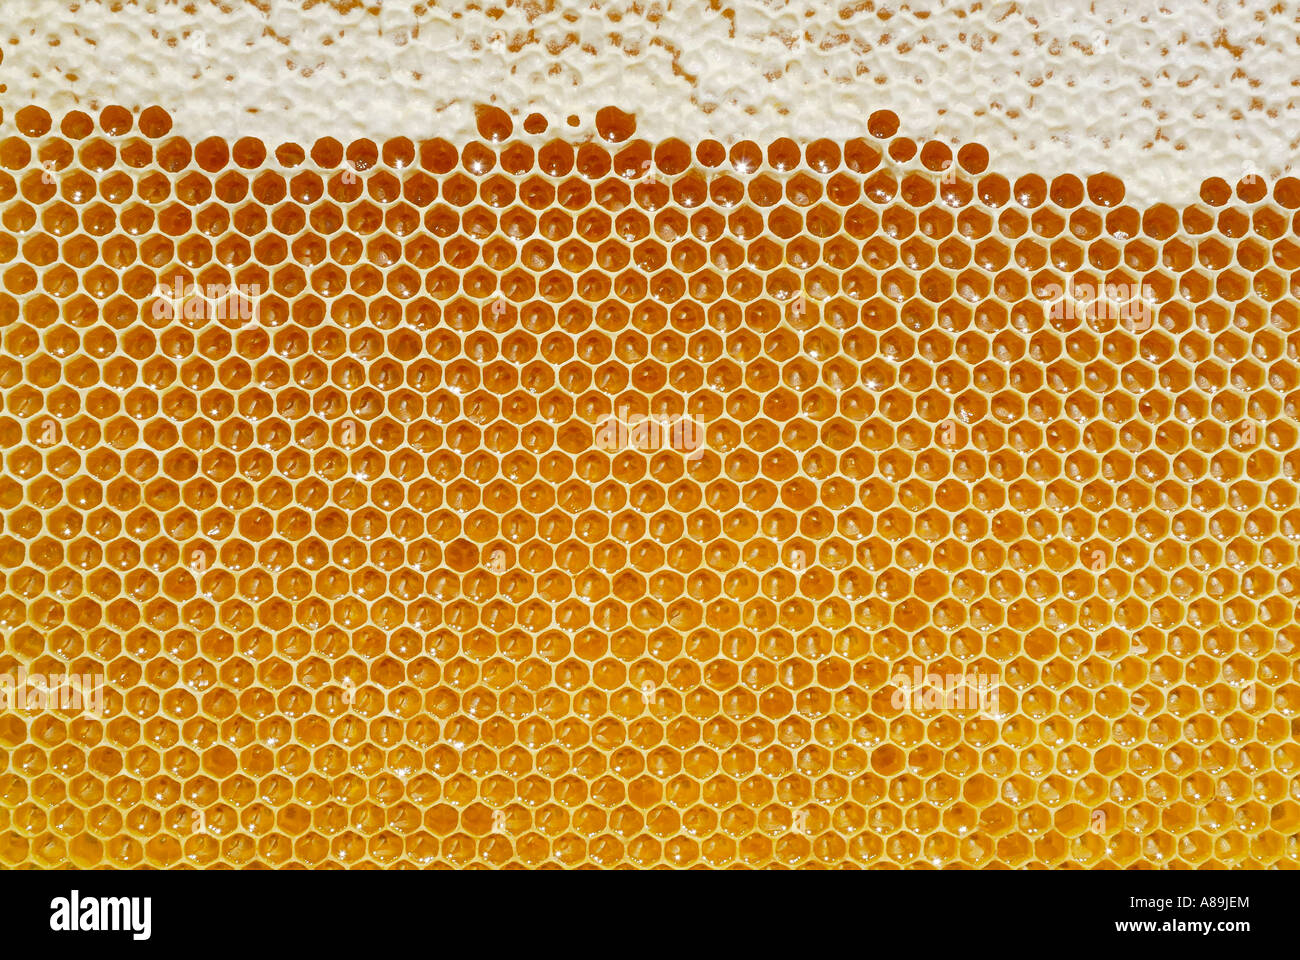 Fresh honeycomb filled with honey from flowers Stock Photo